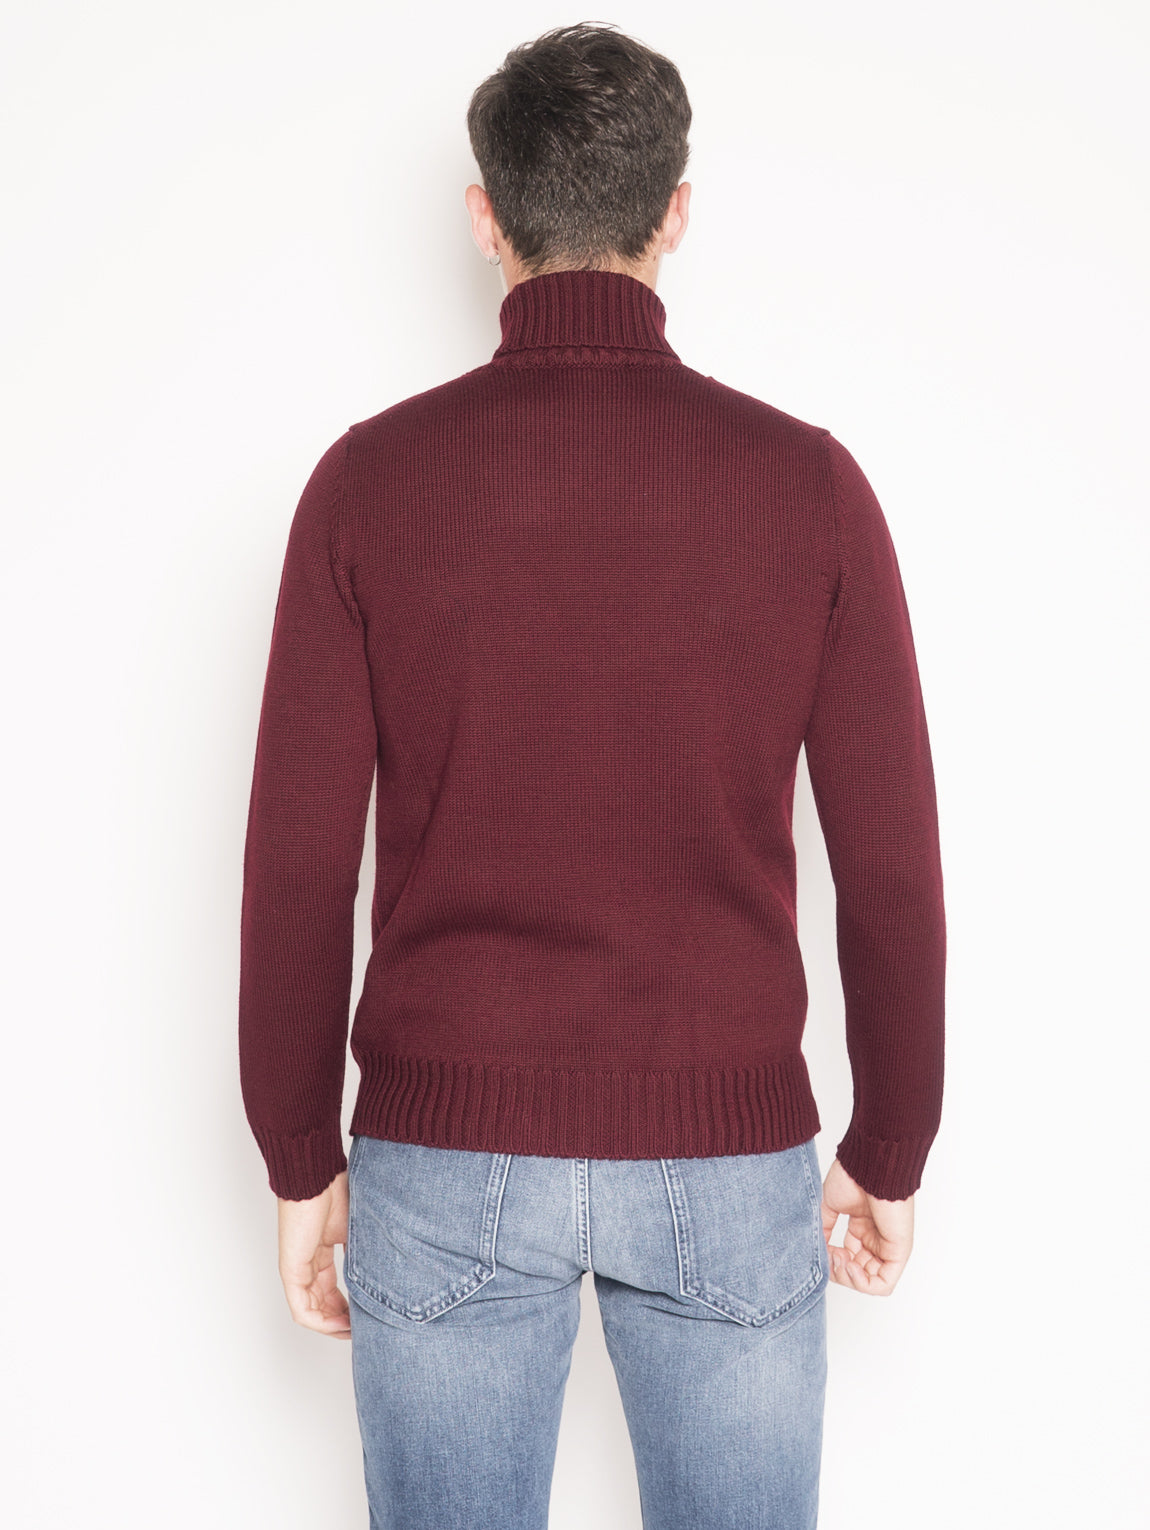 Red wool sweater